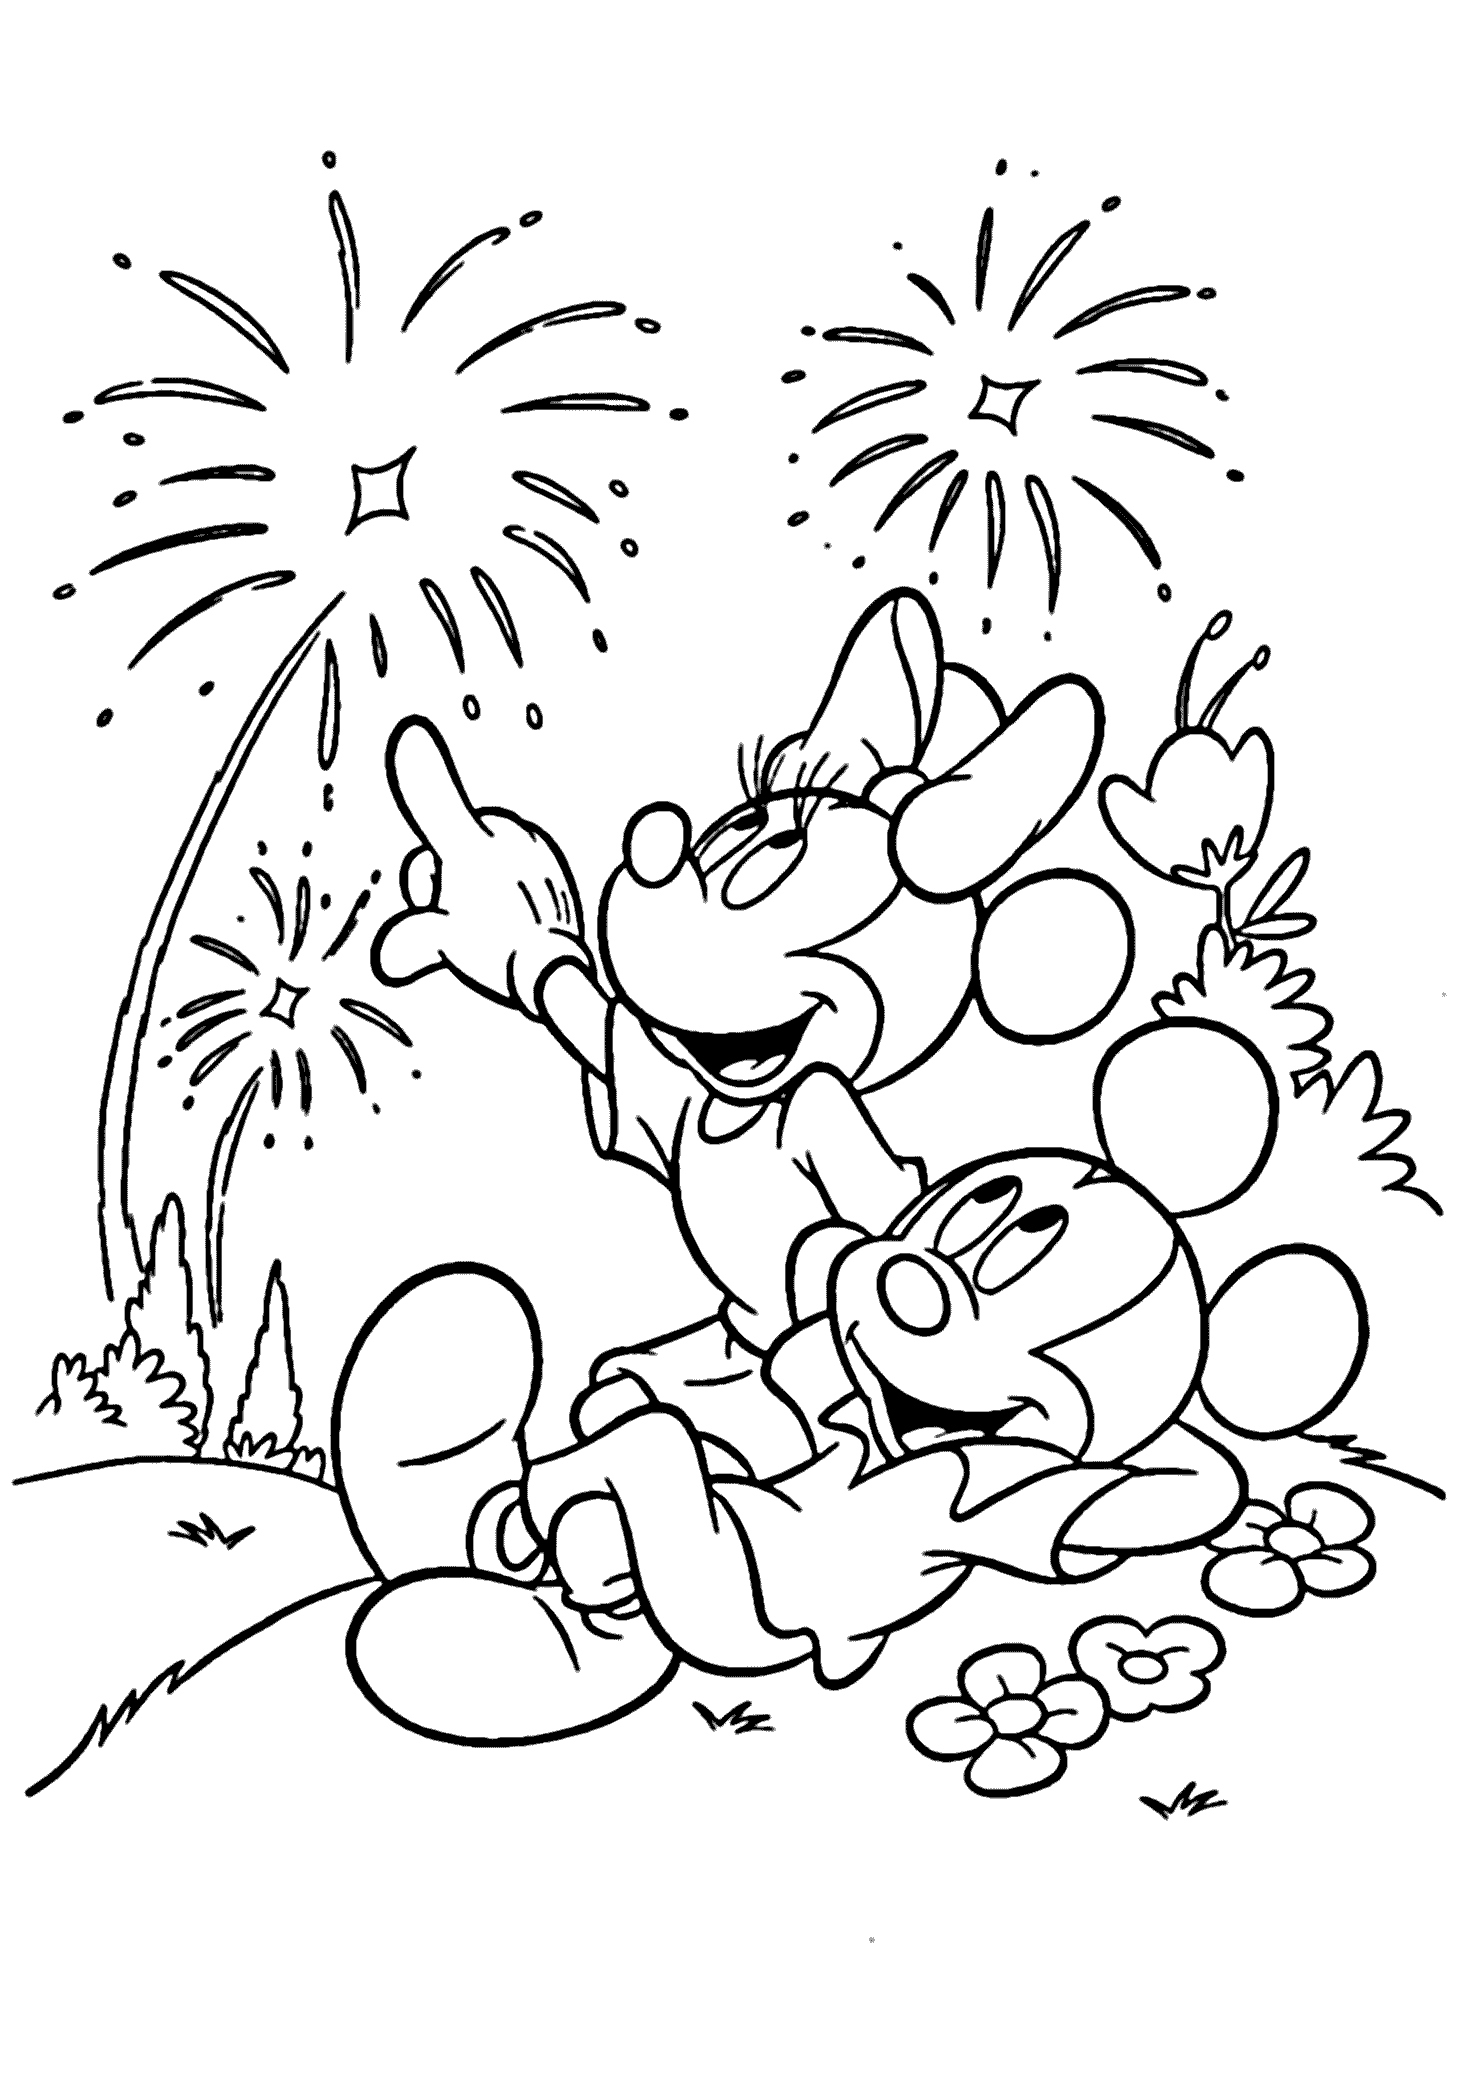 4th-of-july-doodle-coloring-page-free-printable-coloring-pages